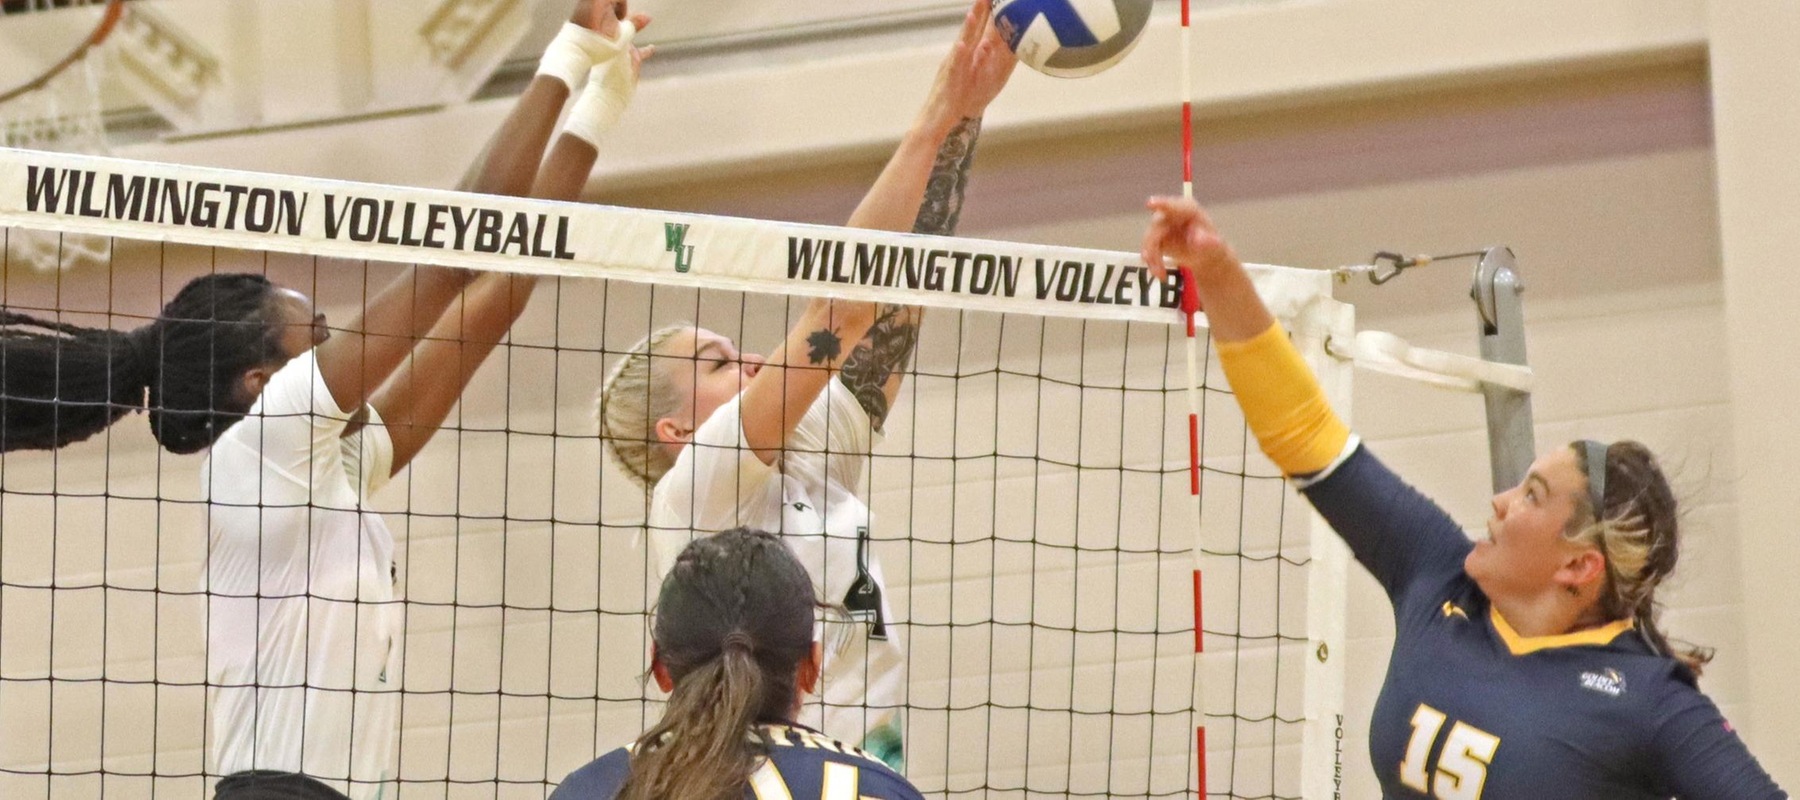 The Wildcats had 21 total blocks in a 3-2 comeback victory at Georgian Court. Copyright 2021; Wilmington University. All rights reserved. Photo by Trudy Spence. September 25, 2021 vs. Goldey-Beacom.